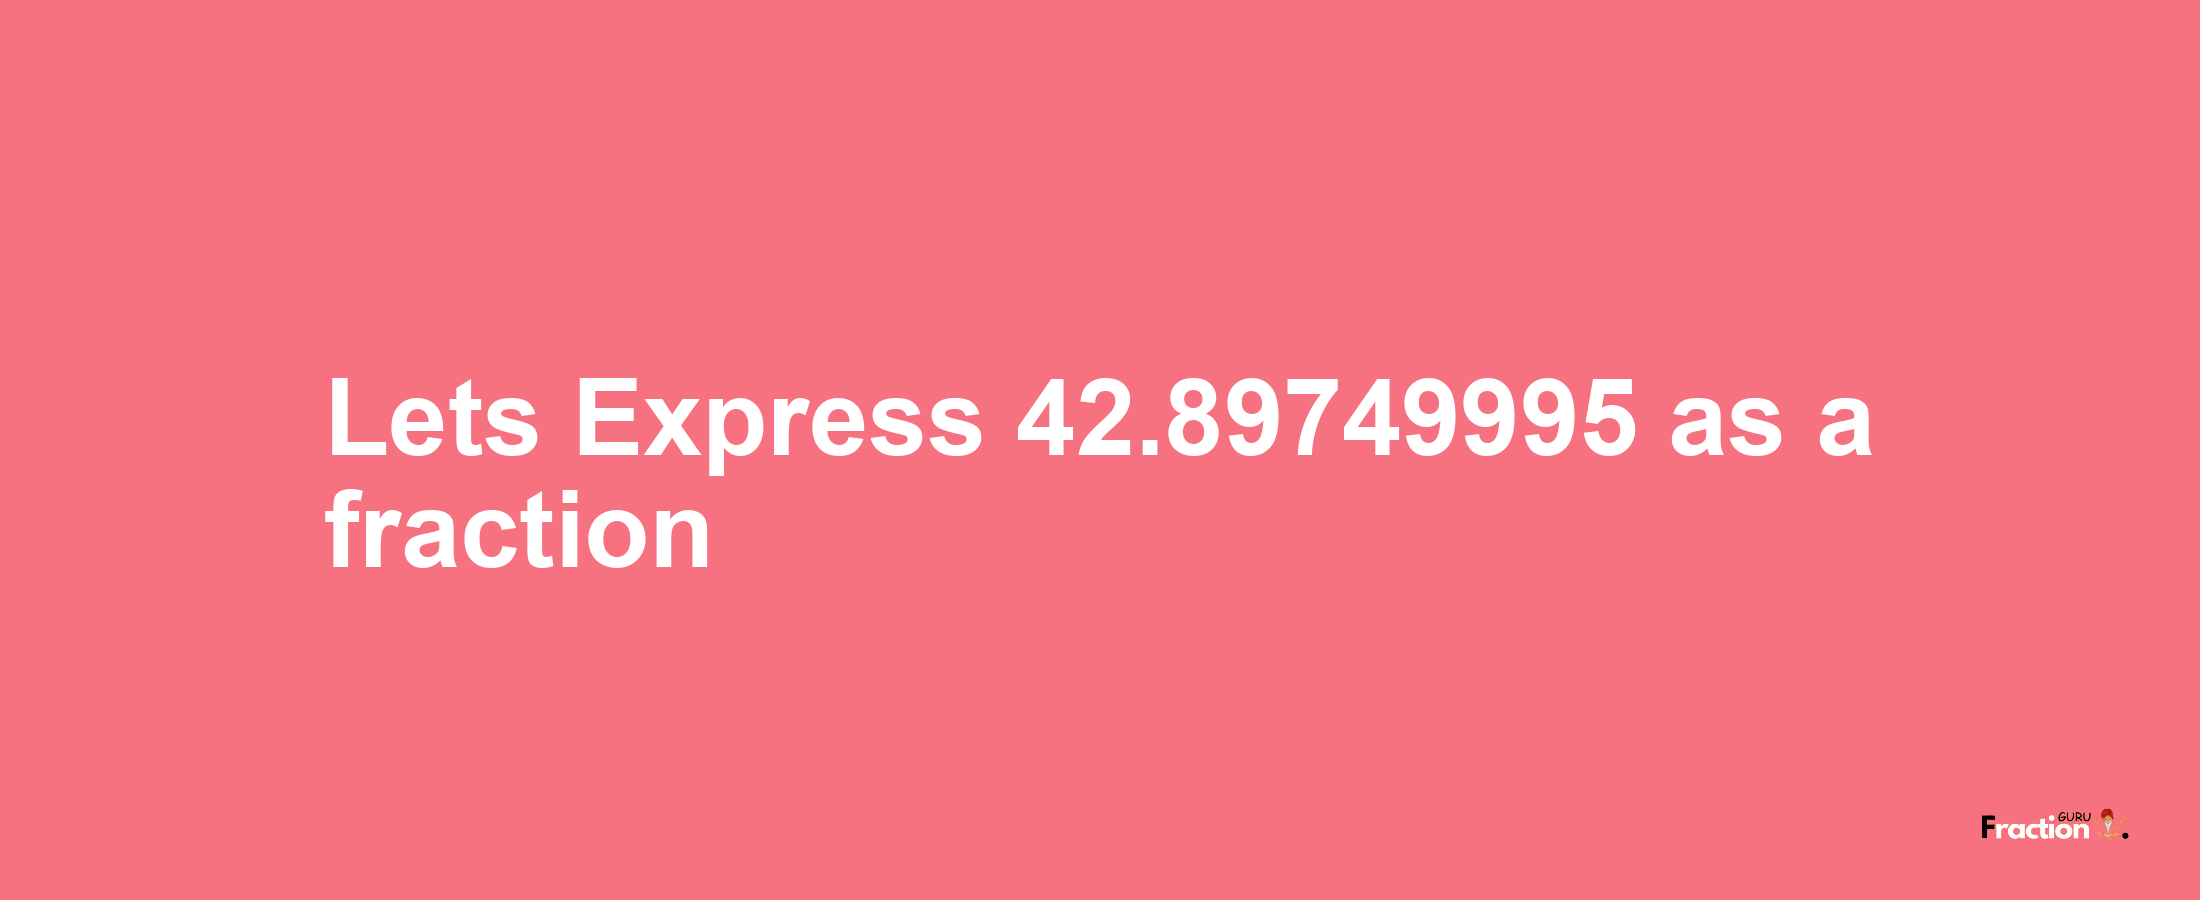 Lets Express 42.89749995 as afraction